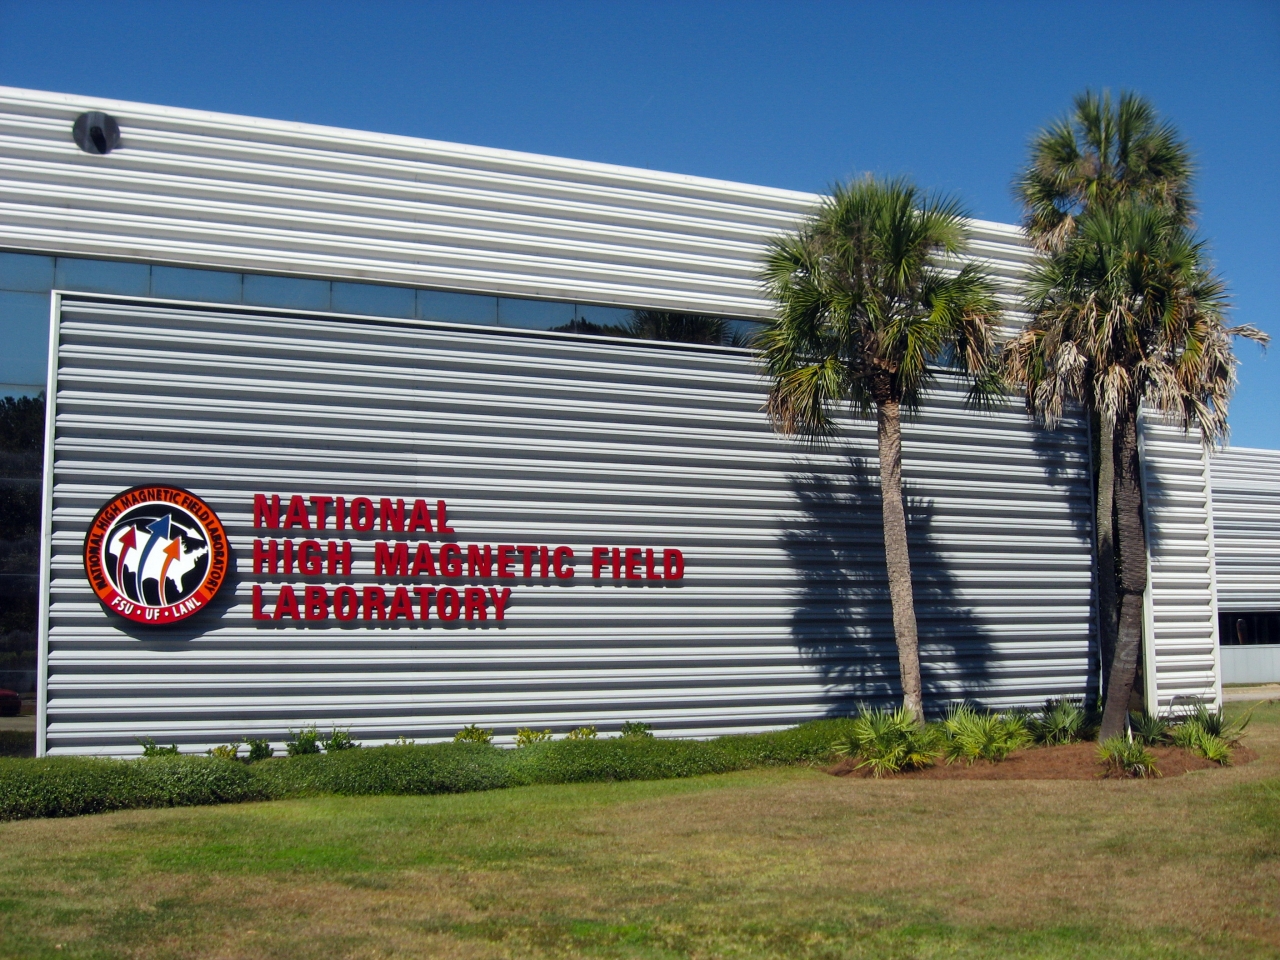 NHMFL seal and sign on the building exterior.